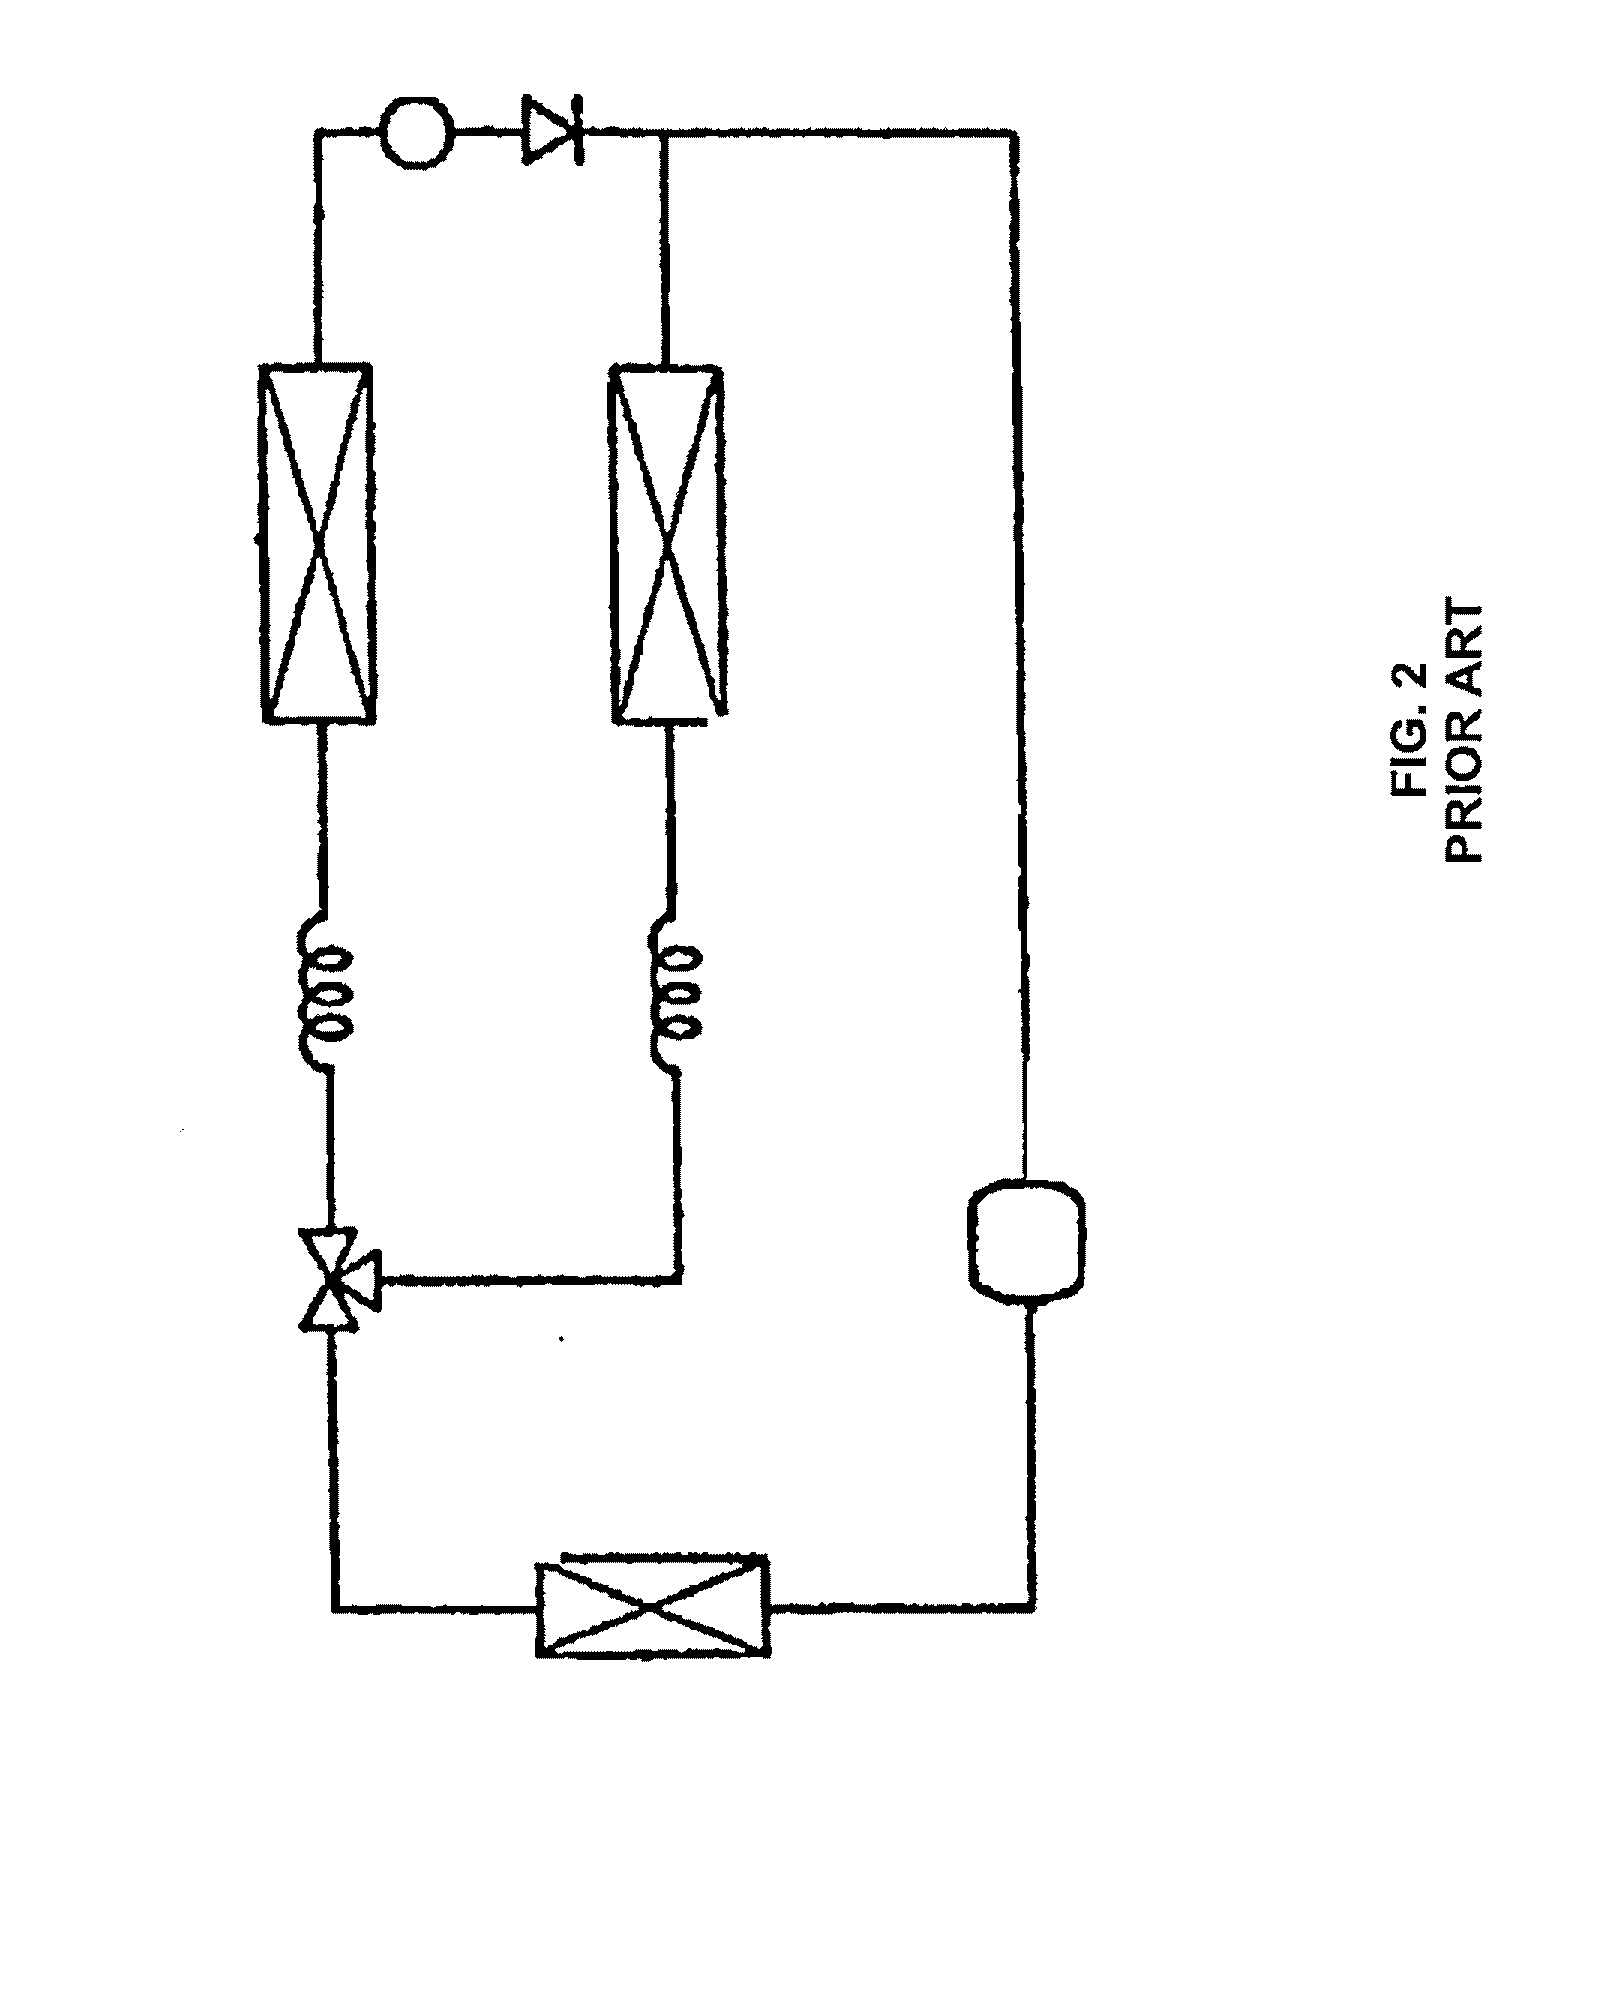 Refrigeration System Including Evaporators Associated in Parallel